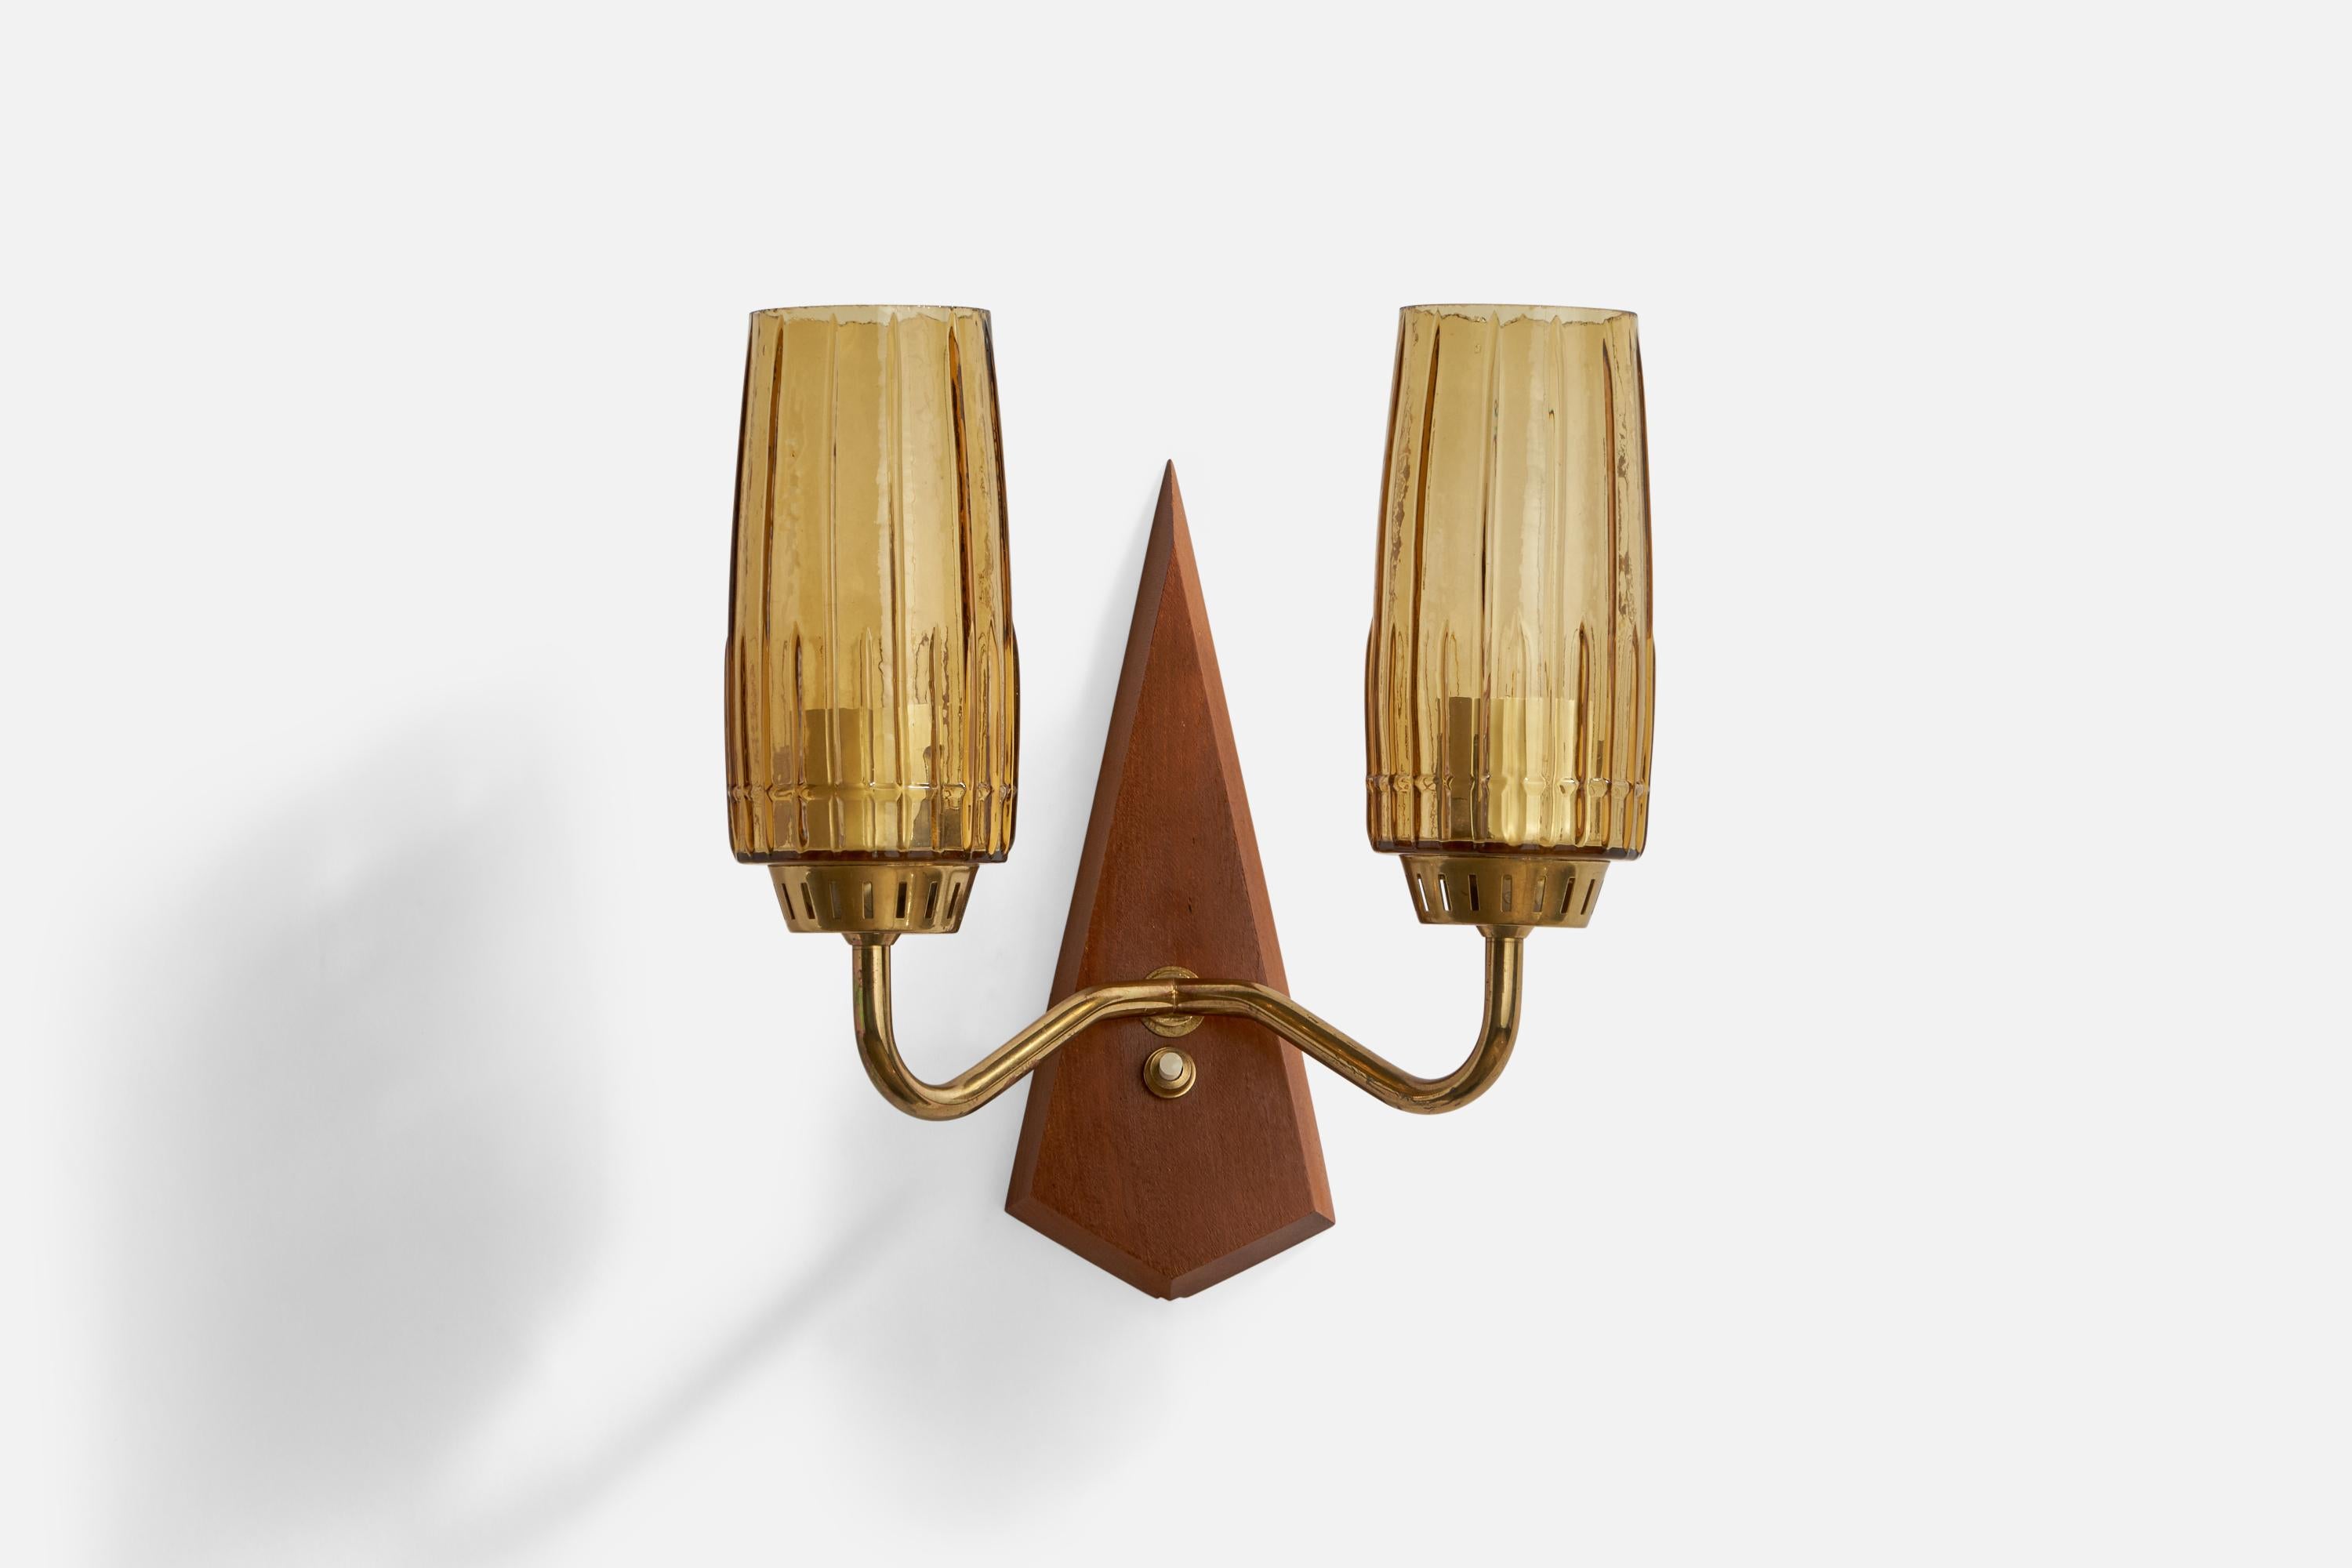 A brass, teak and yellow-coloured glass wall light designed and produced in Sweden, 1950s.

Overall Dimensions (inches): 9.5” H x 8.75” W x 5.35” D
Back Plate Dimensions (inches): 8” H x 3.25” W x 1” D
Bulb Specifications: E-14 Bulbs
Number of